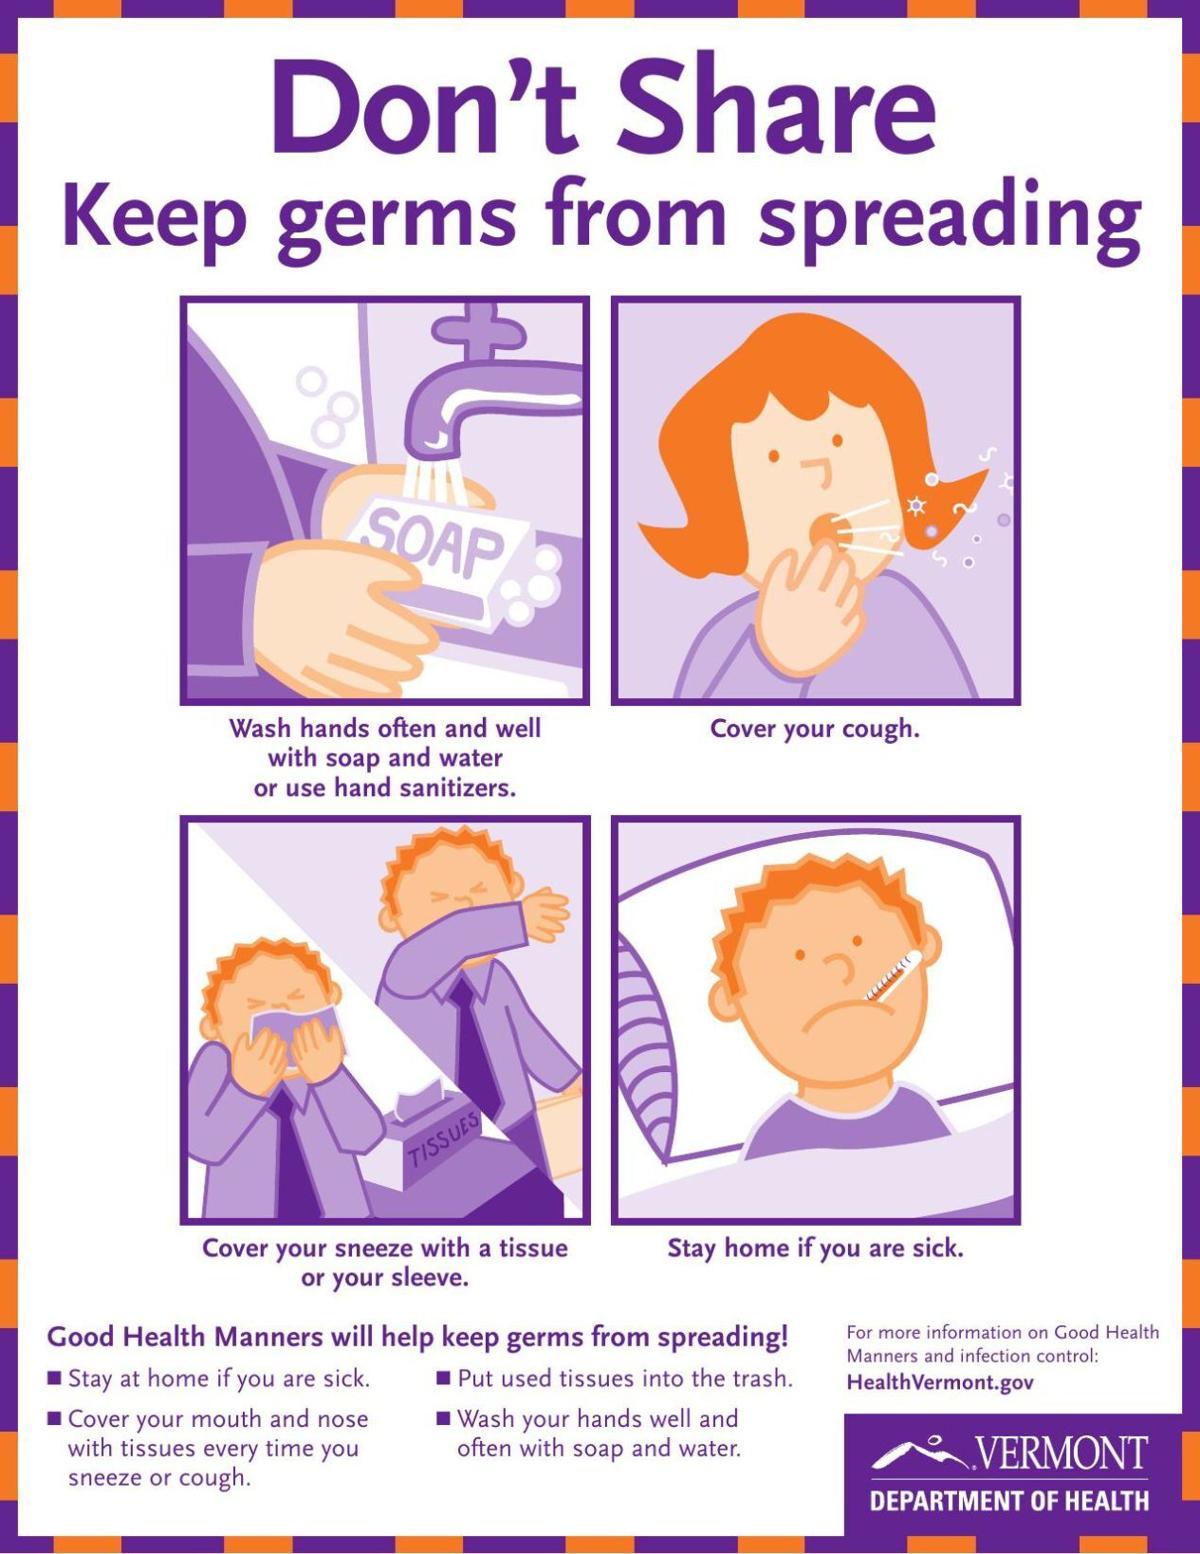 Keep germs from spreading